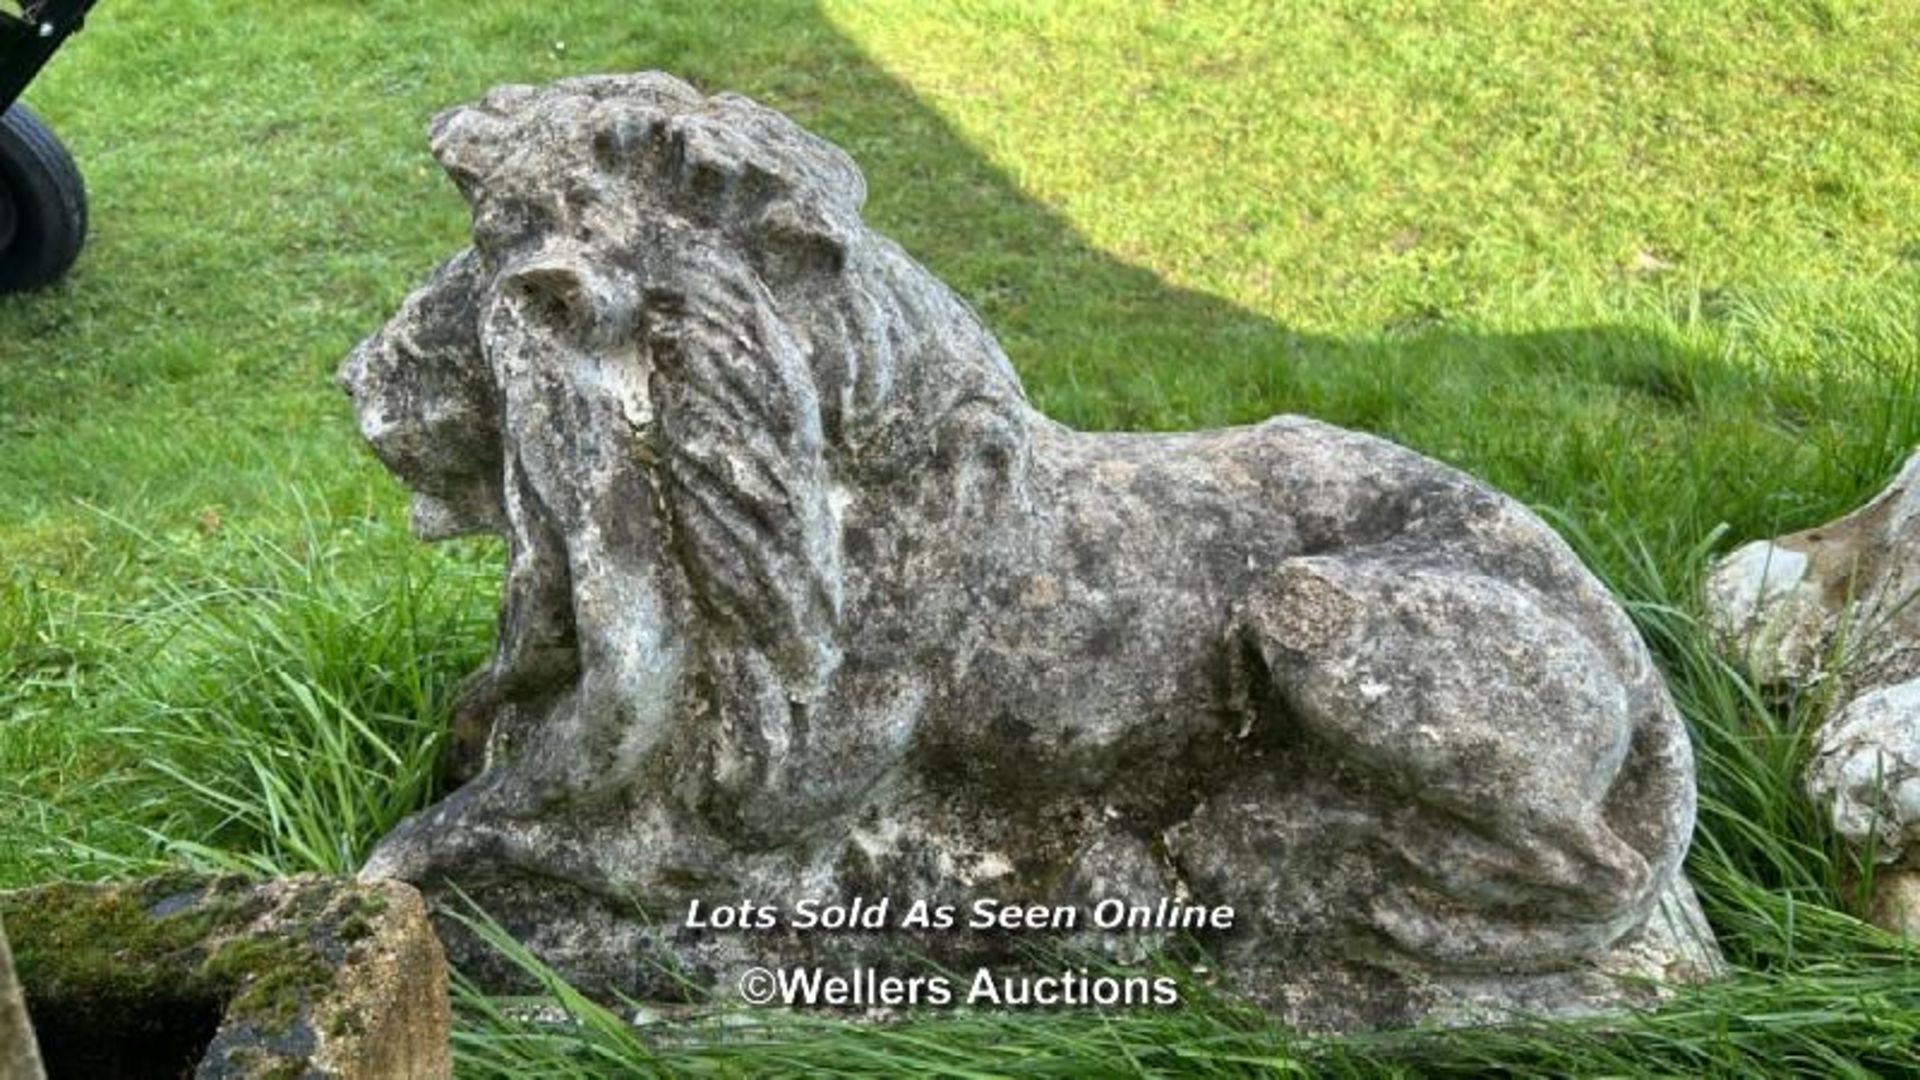 PAIR OF COMPOSITION RECUMBENT LION STATUES, WEATHERED, 70 X 30 X 50CM - Image 7 of 7